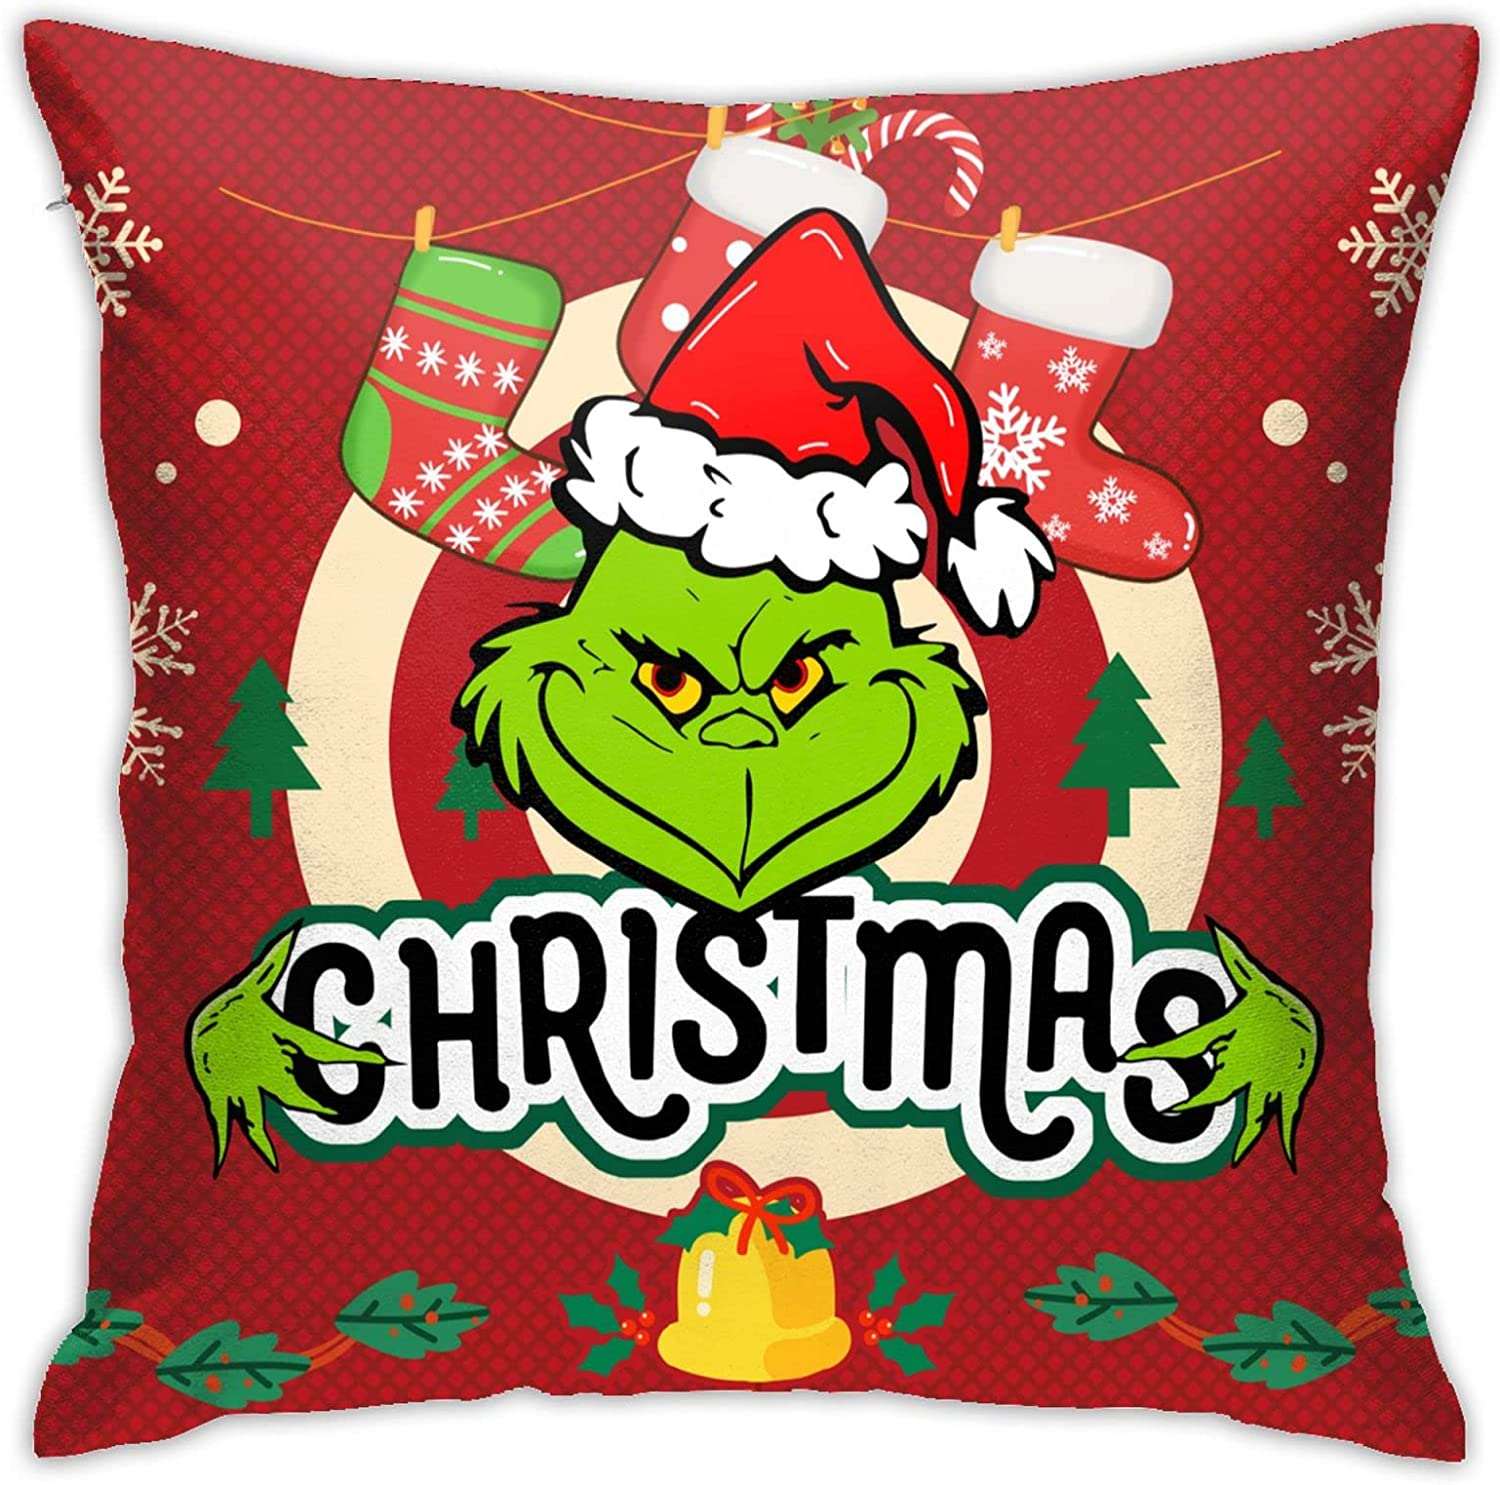 the grinch, Holiday, Dr Seuss The Grinch Who Stole Christmas Round Plush  Pillow